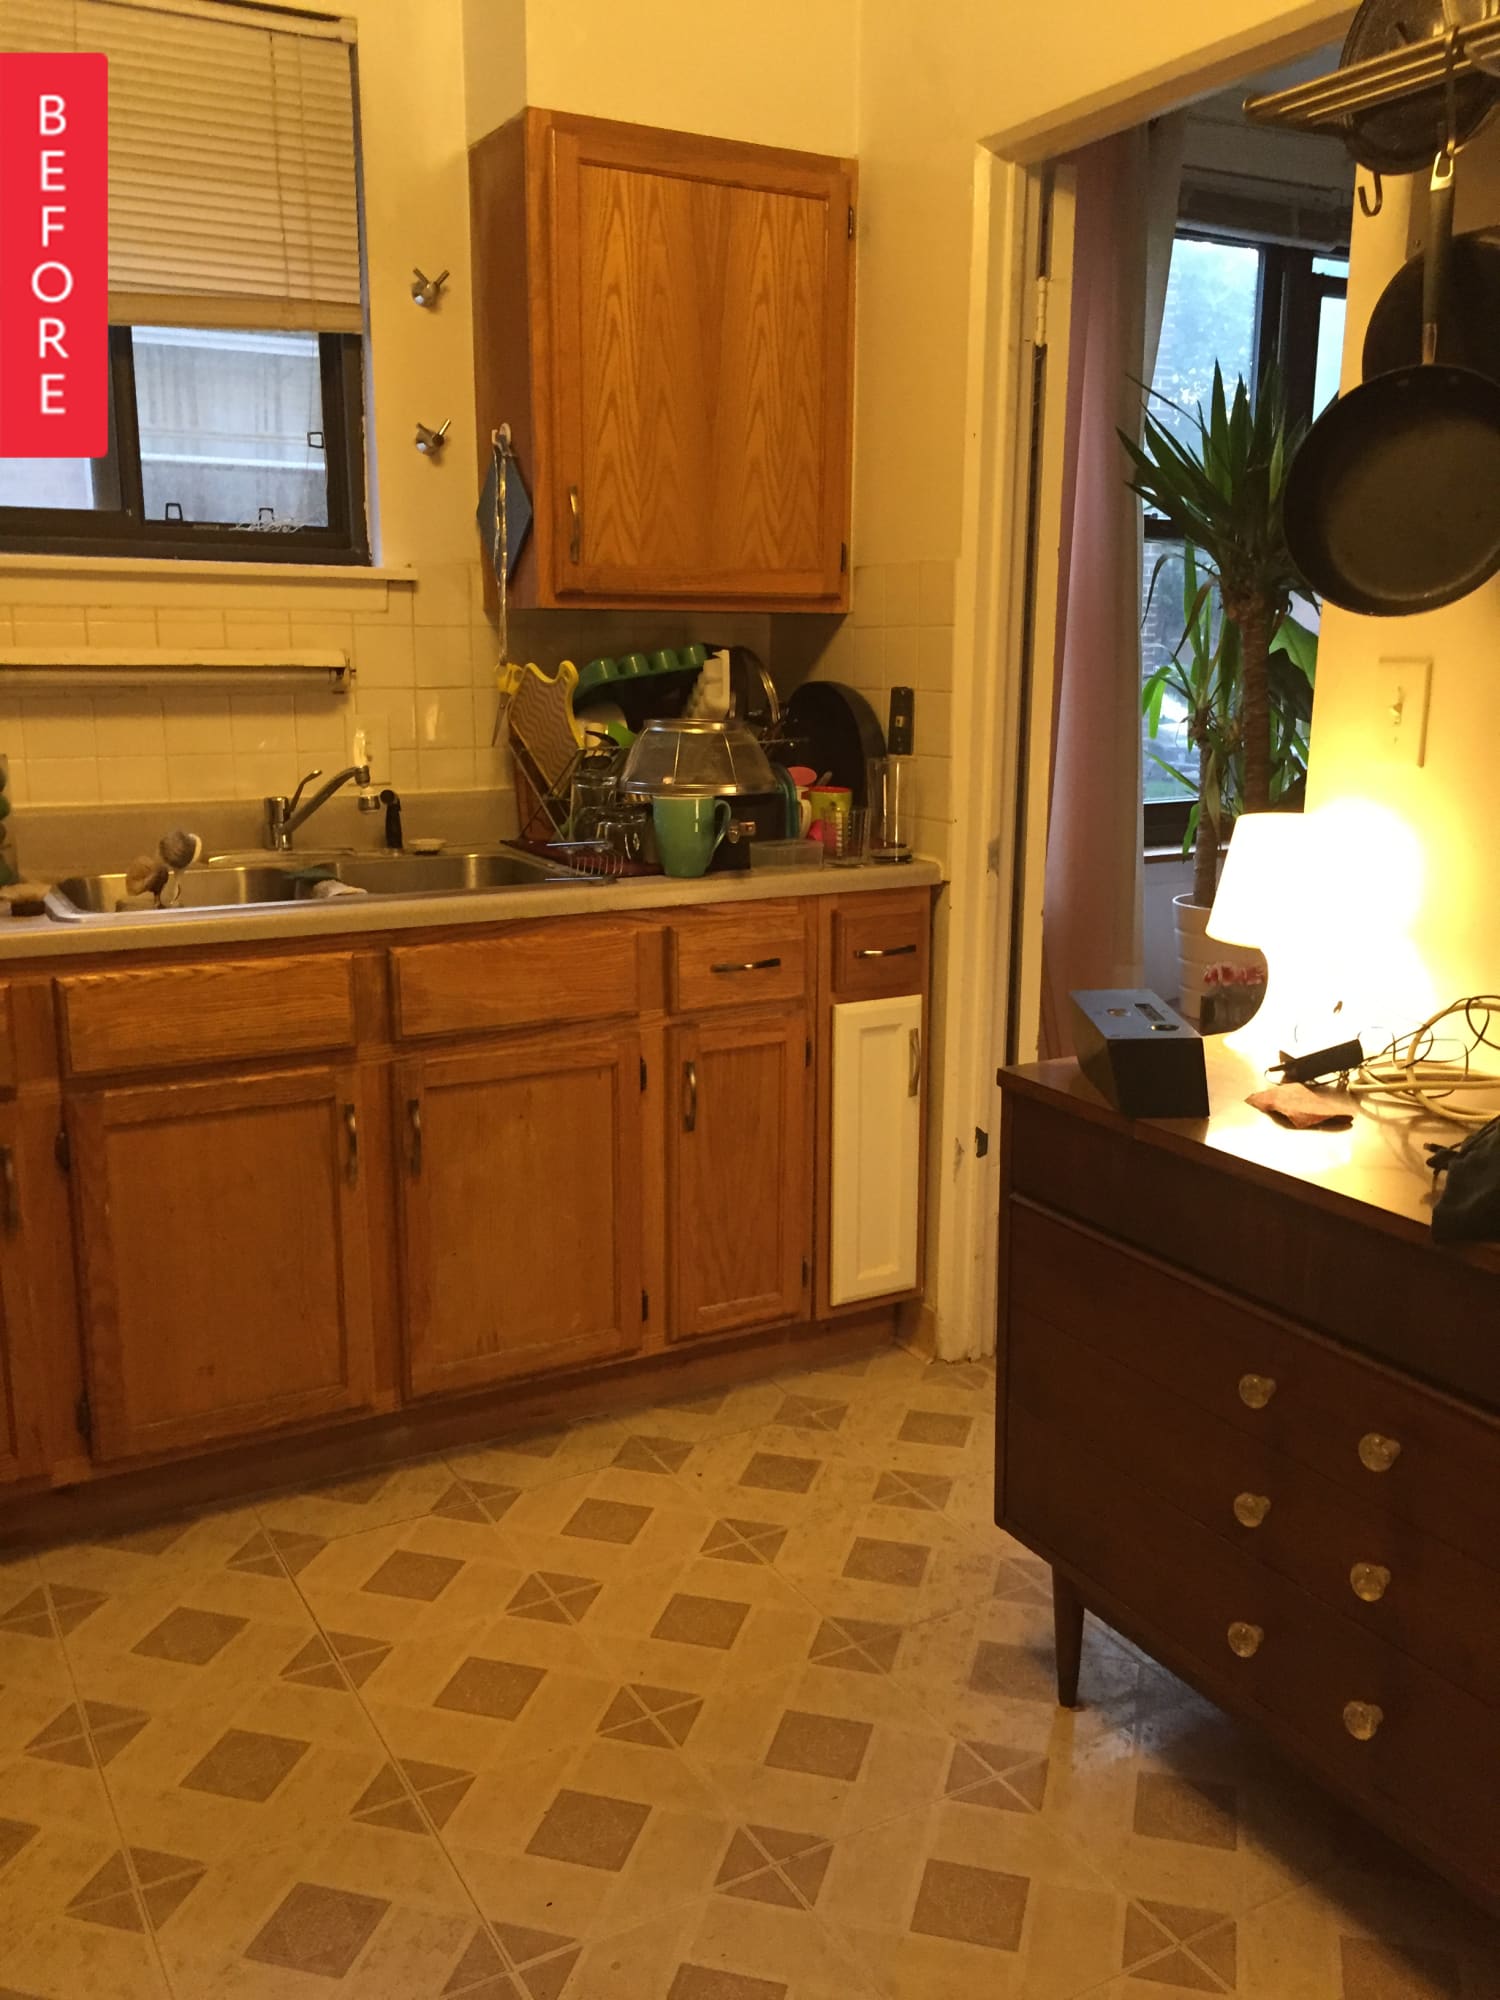 A Rental Kitchen Makeover with a Vinyl Wood Plank Floor 